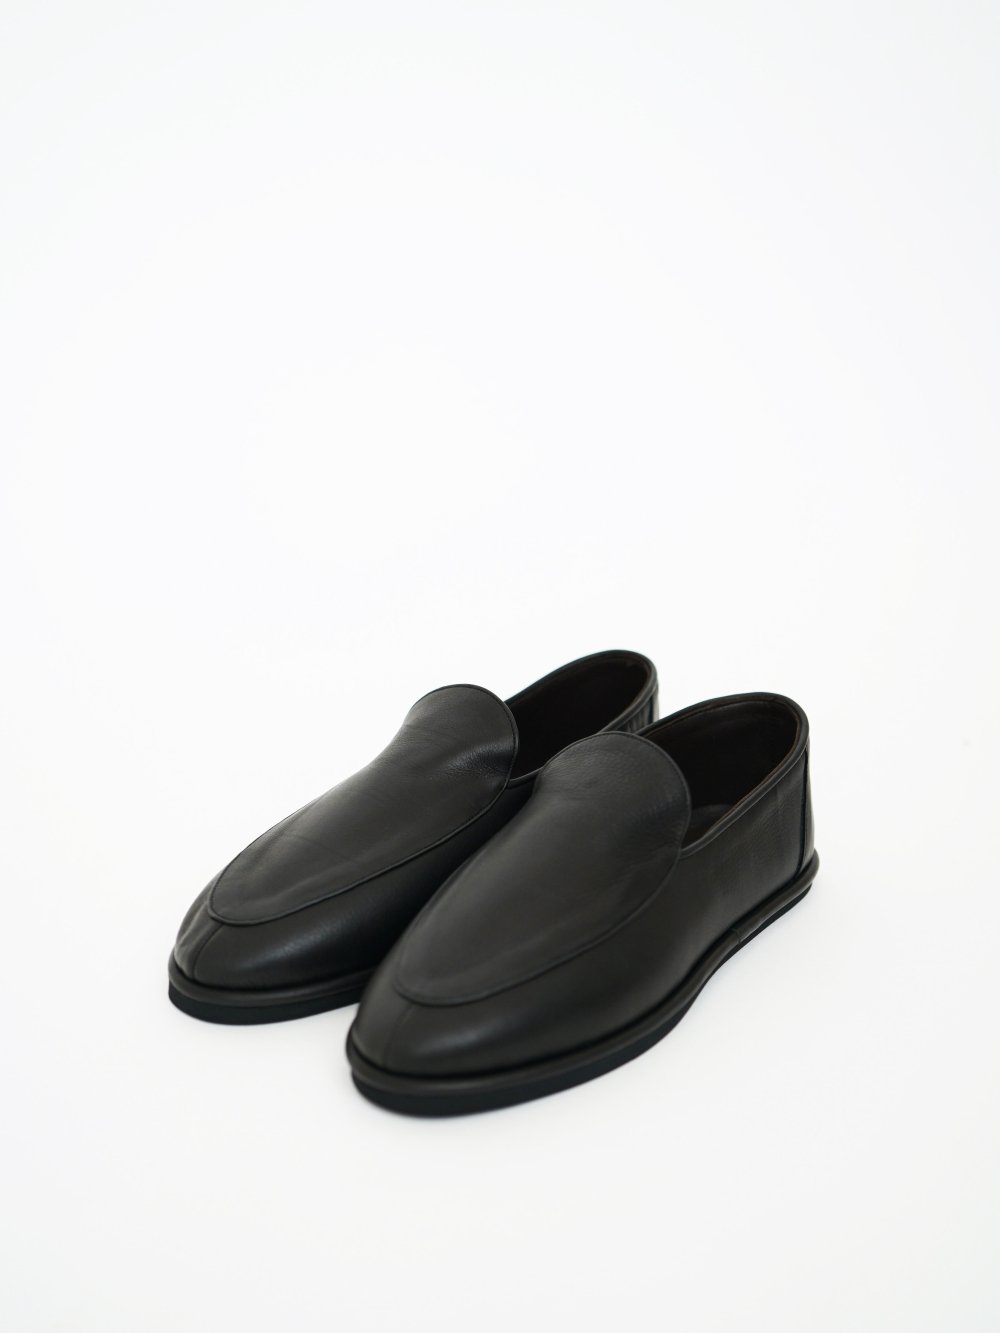 AURALEE LEATHER SHOES / BLACK